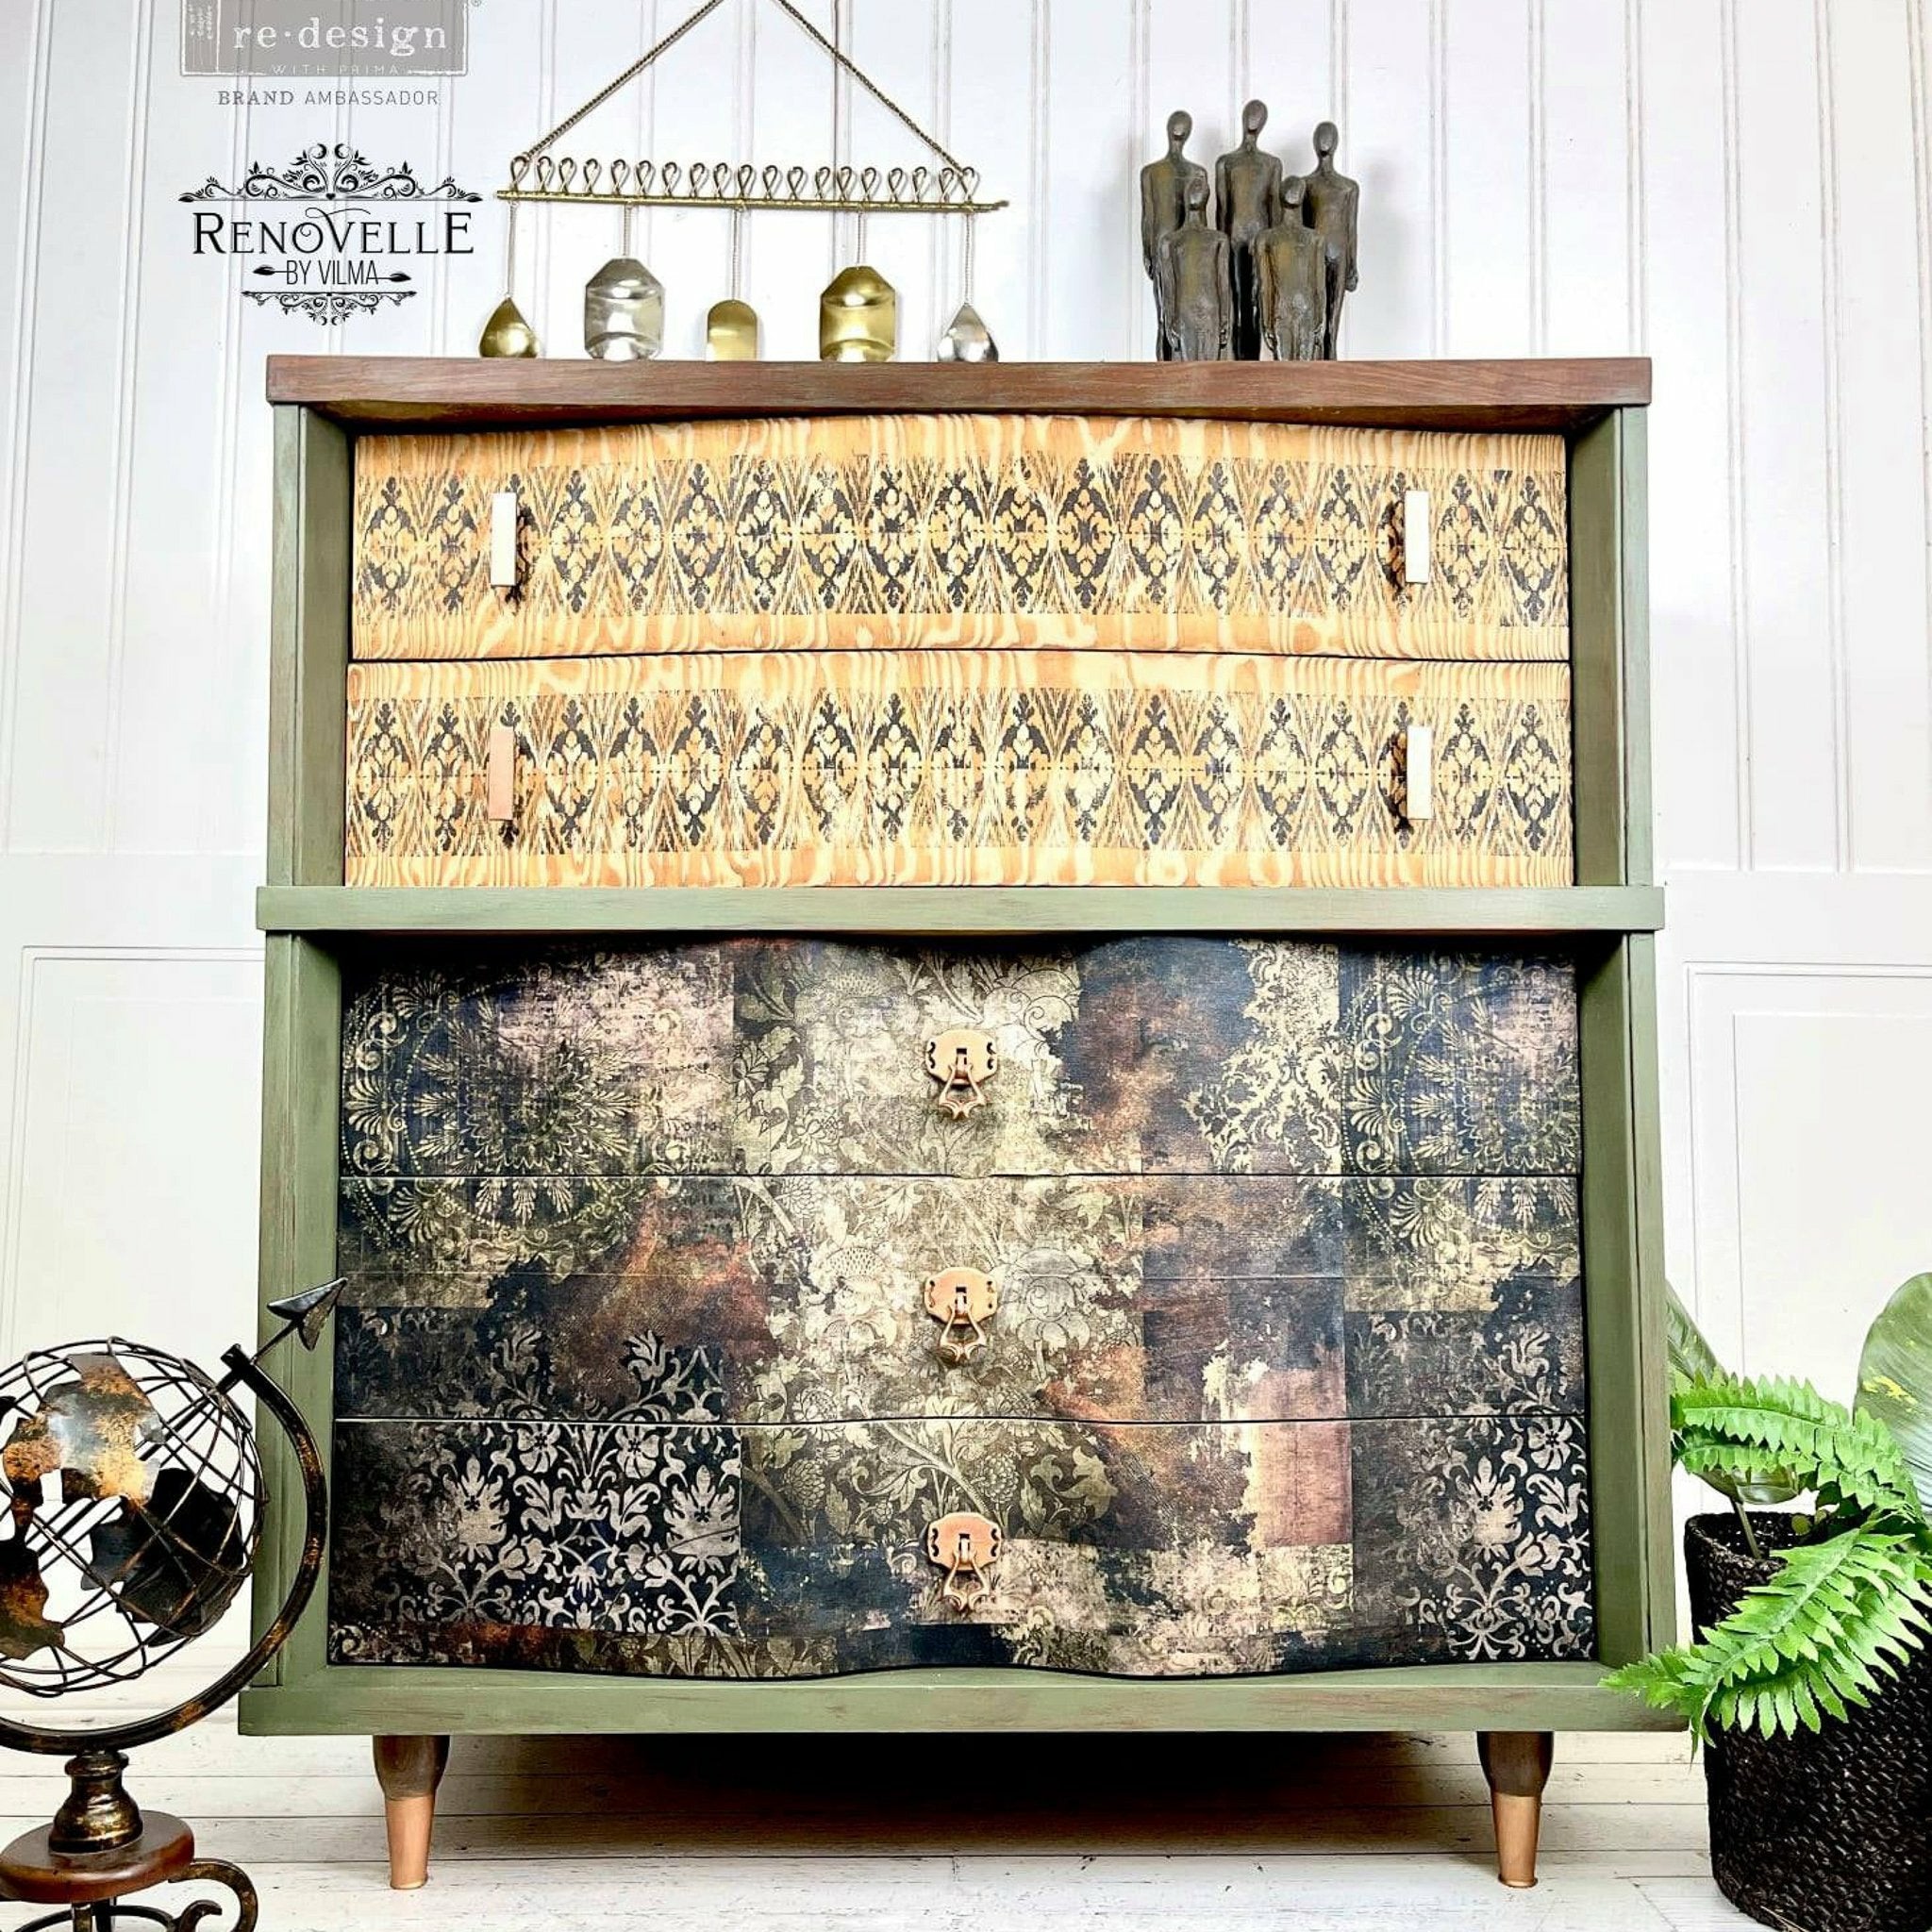 A vintage 5-drawer dresser refurbished by Renovelle by Vilma features ReDesign with Prima's Gothic Rhapsody tissue paper on its bottom 3 drawers.